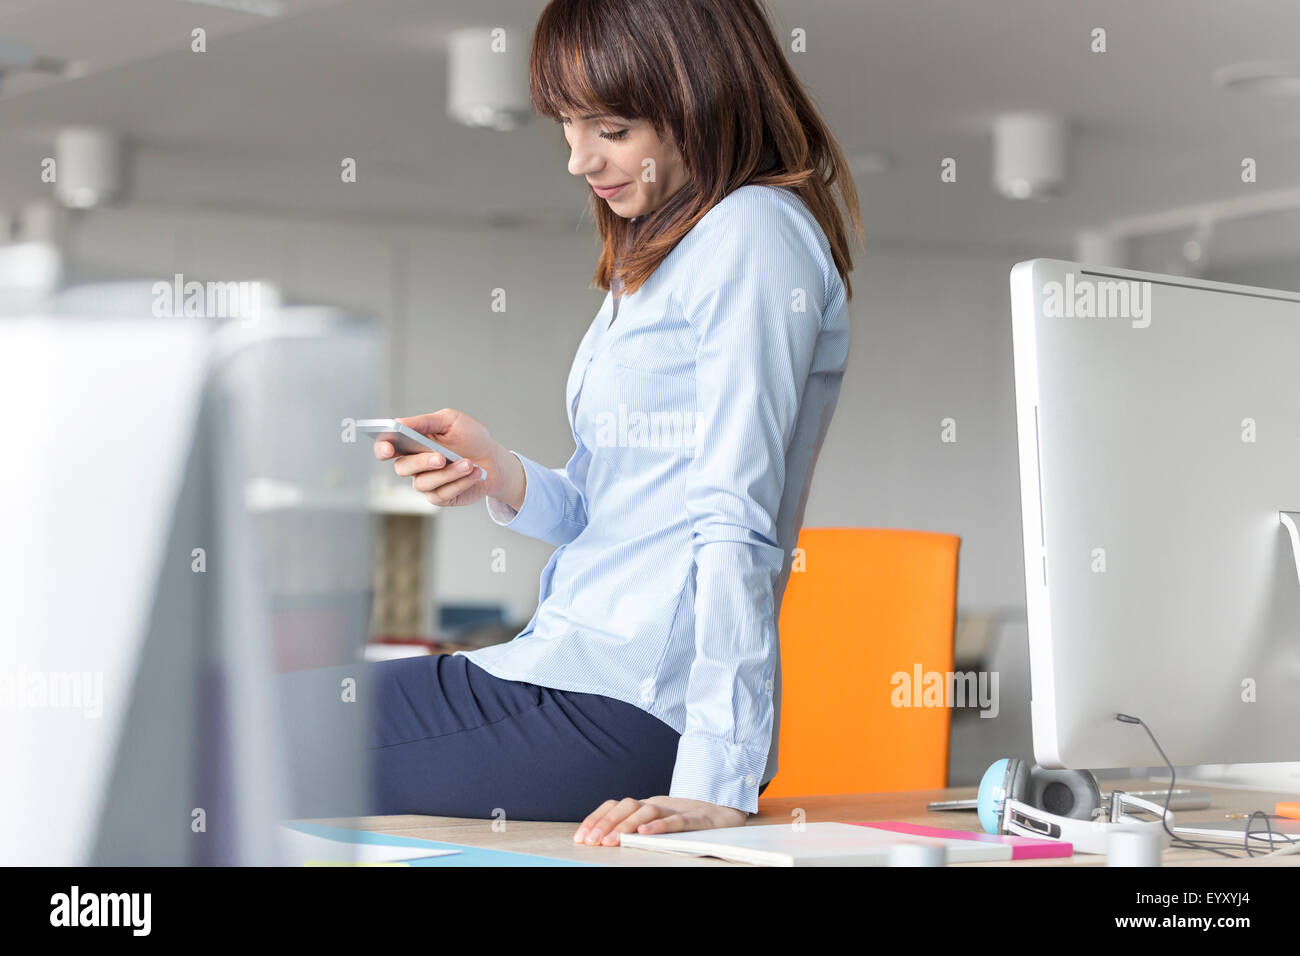 Brunette businesswoman texting with cell phone on desk in office Stock Photo